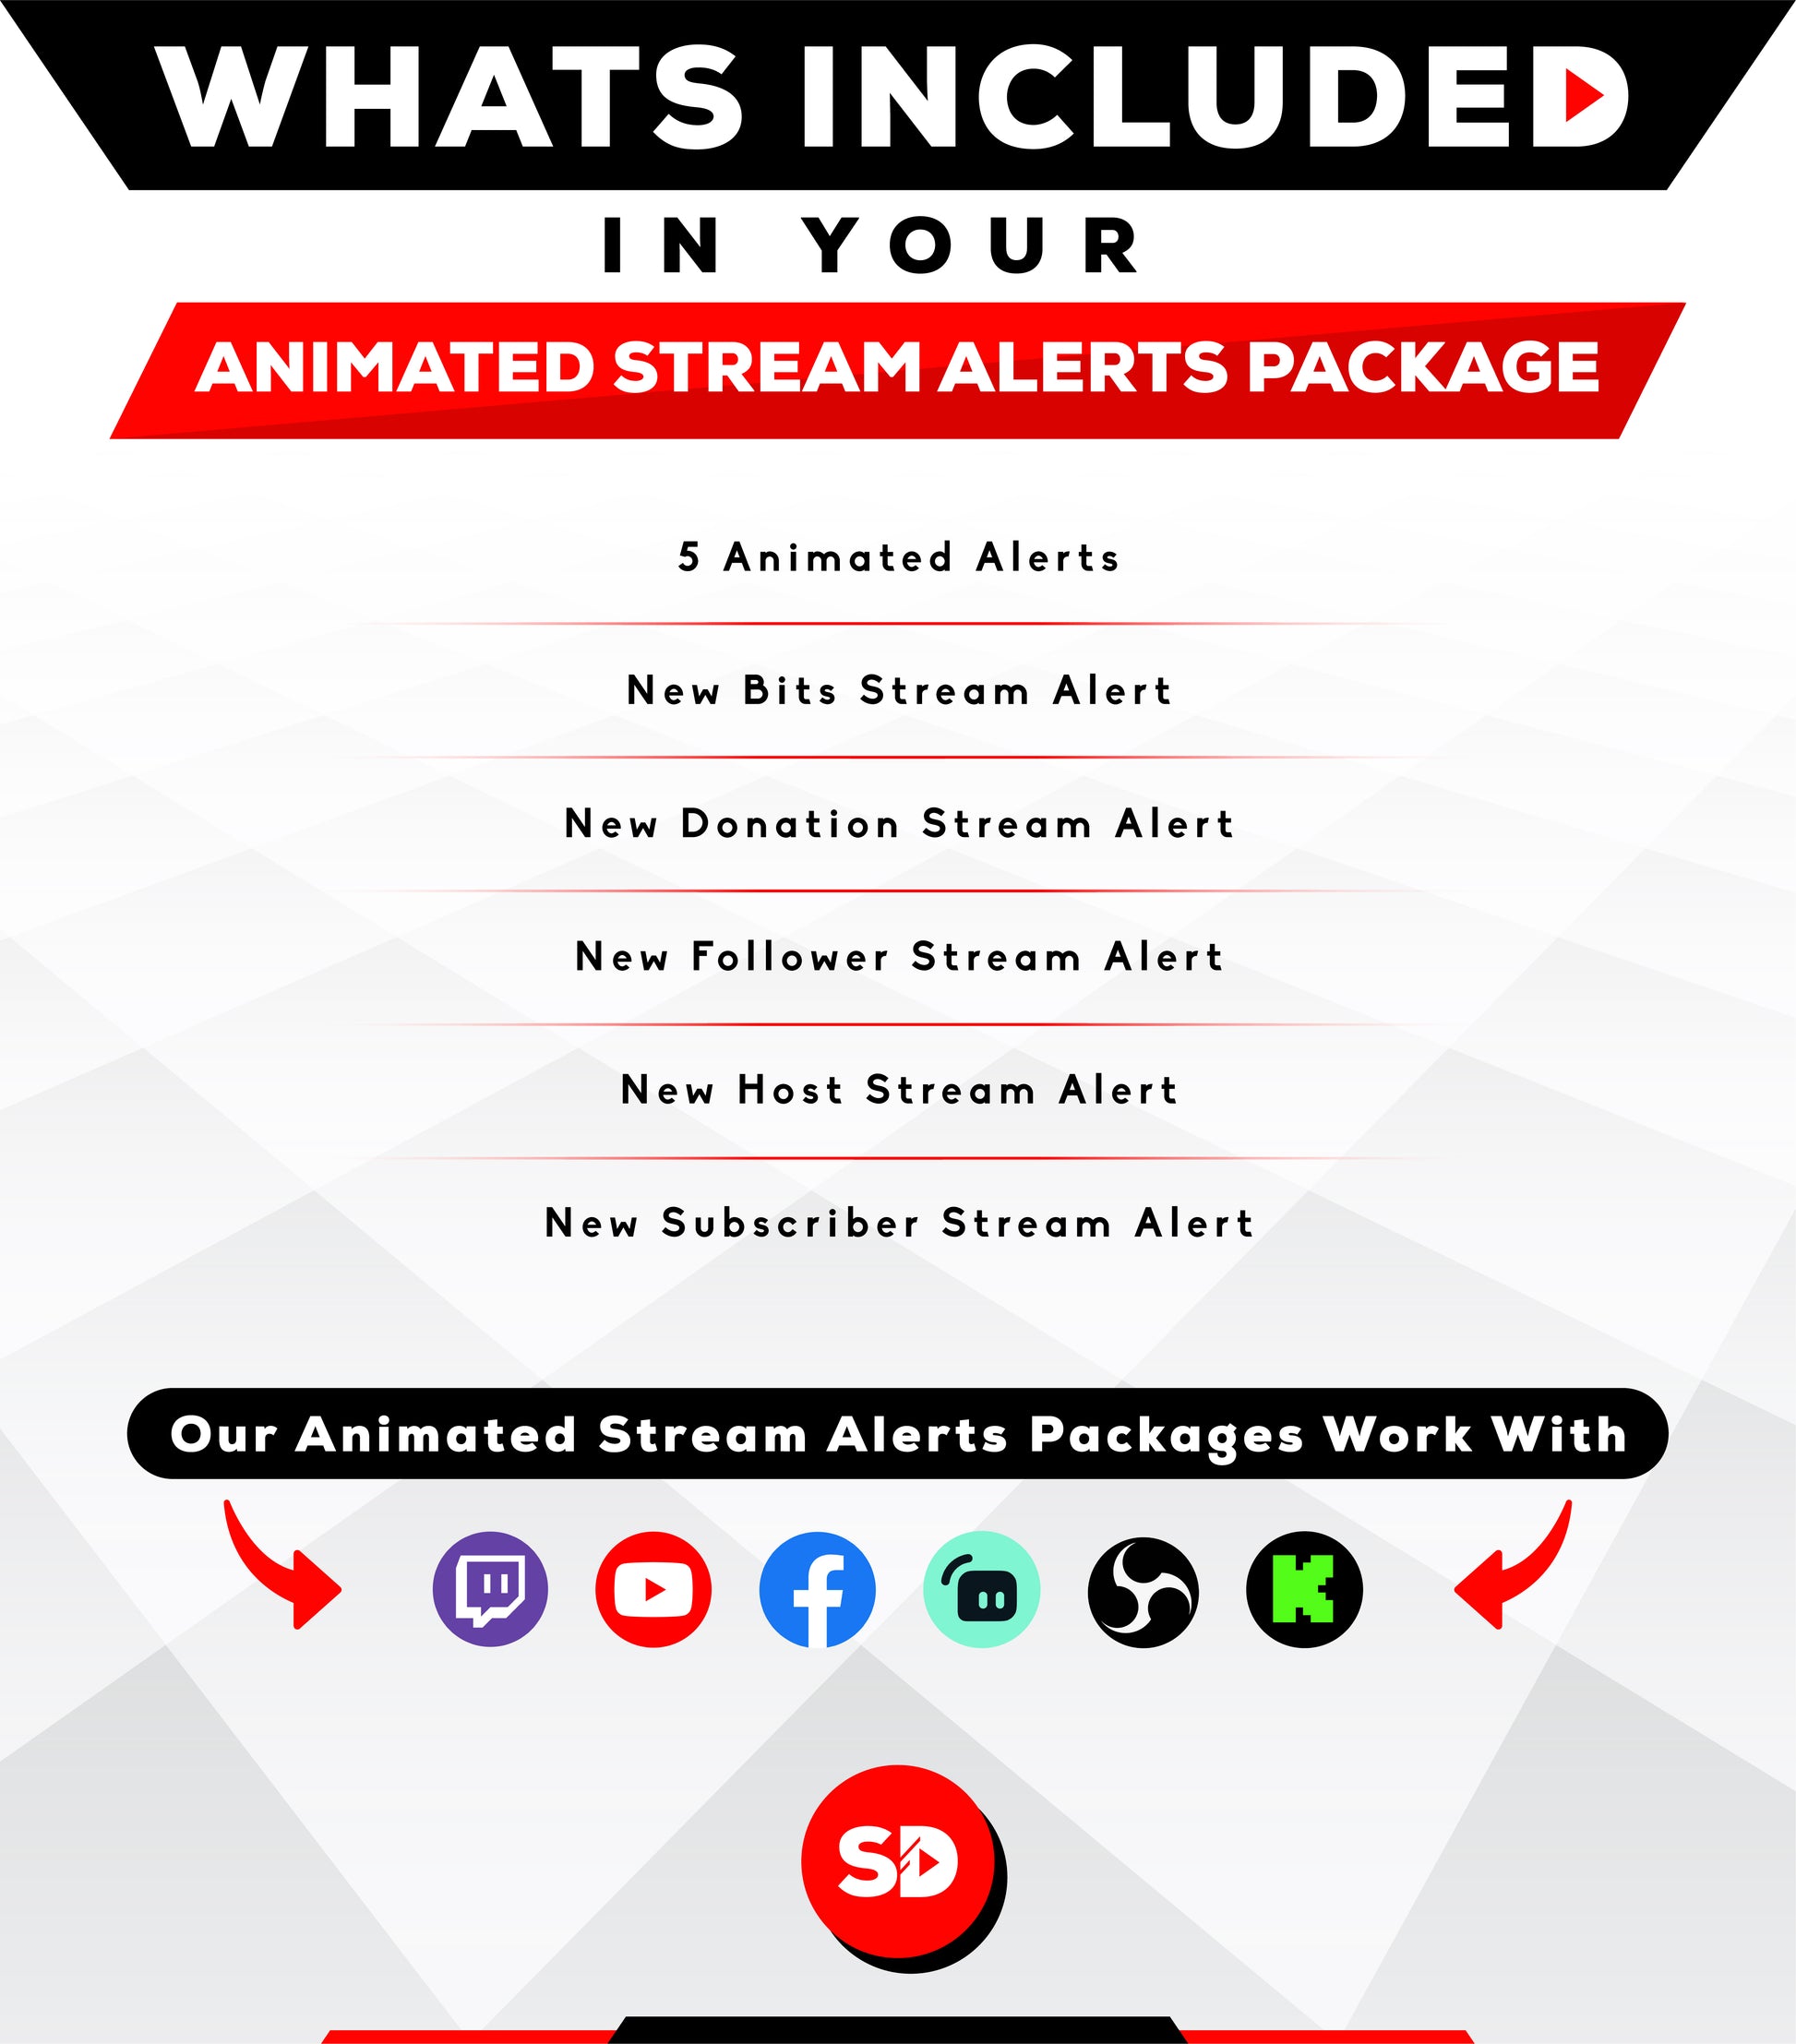 Whats included in your package - Alerts - Merry christmas